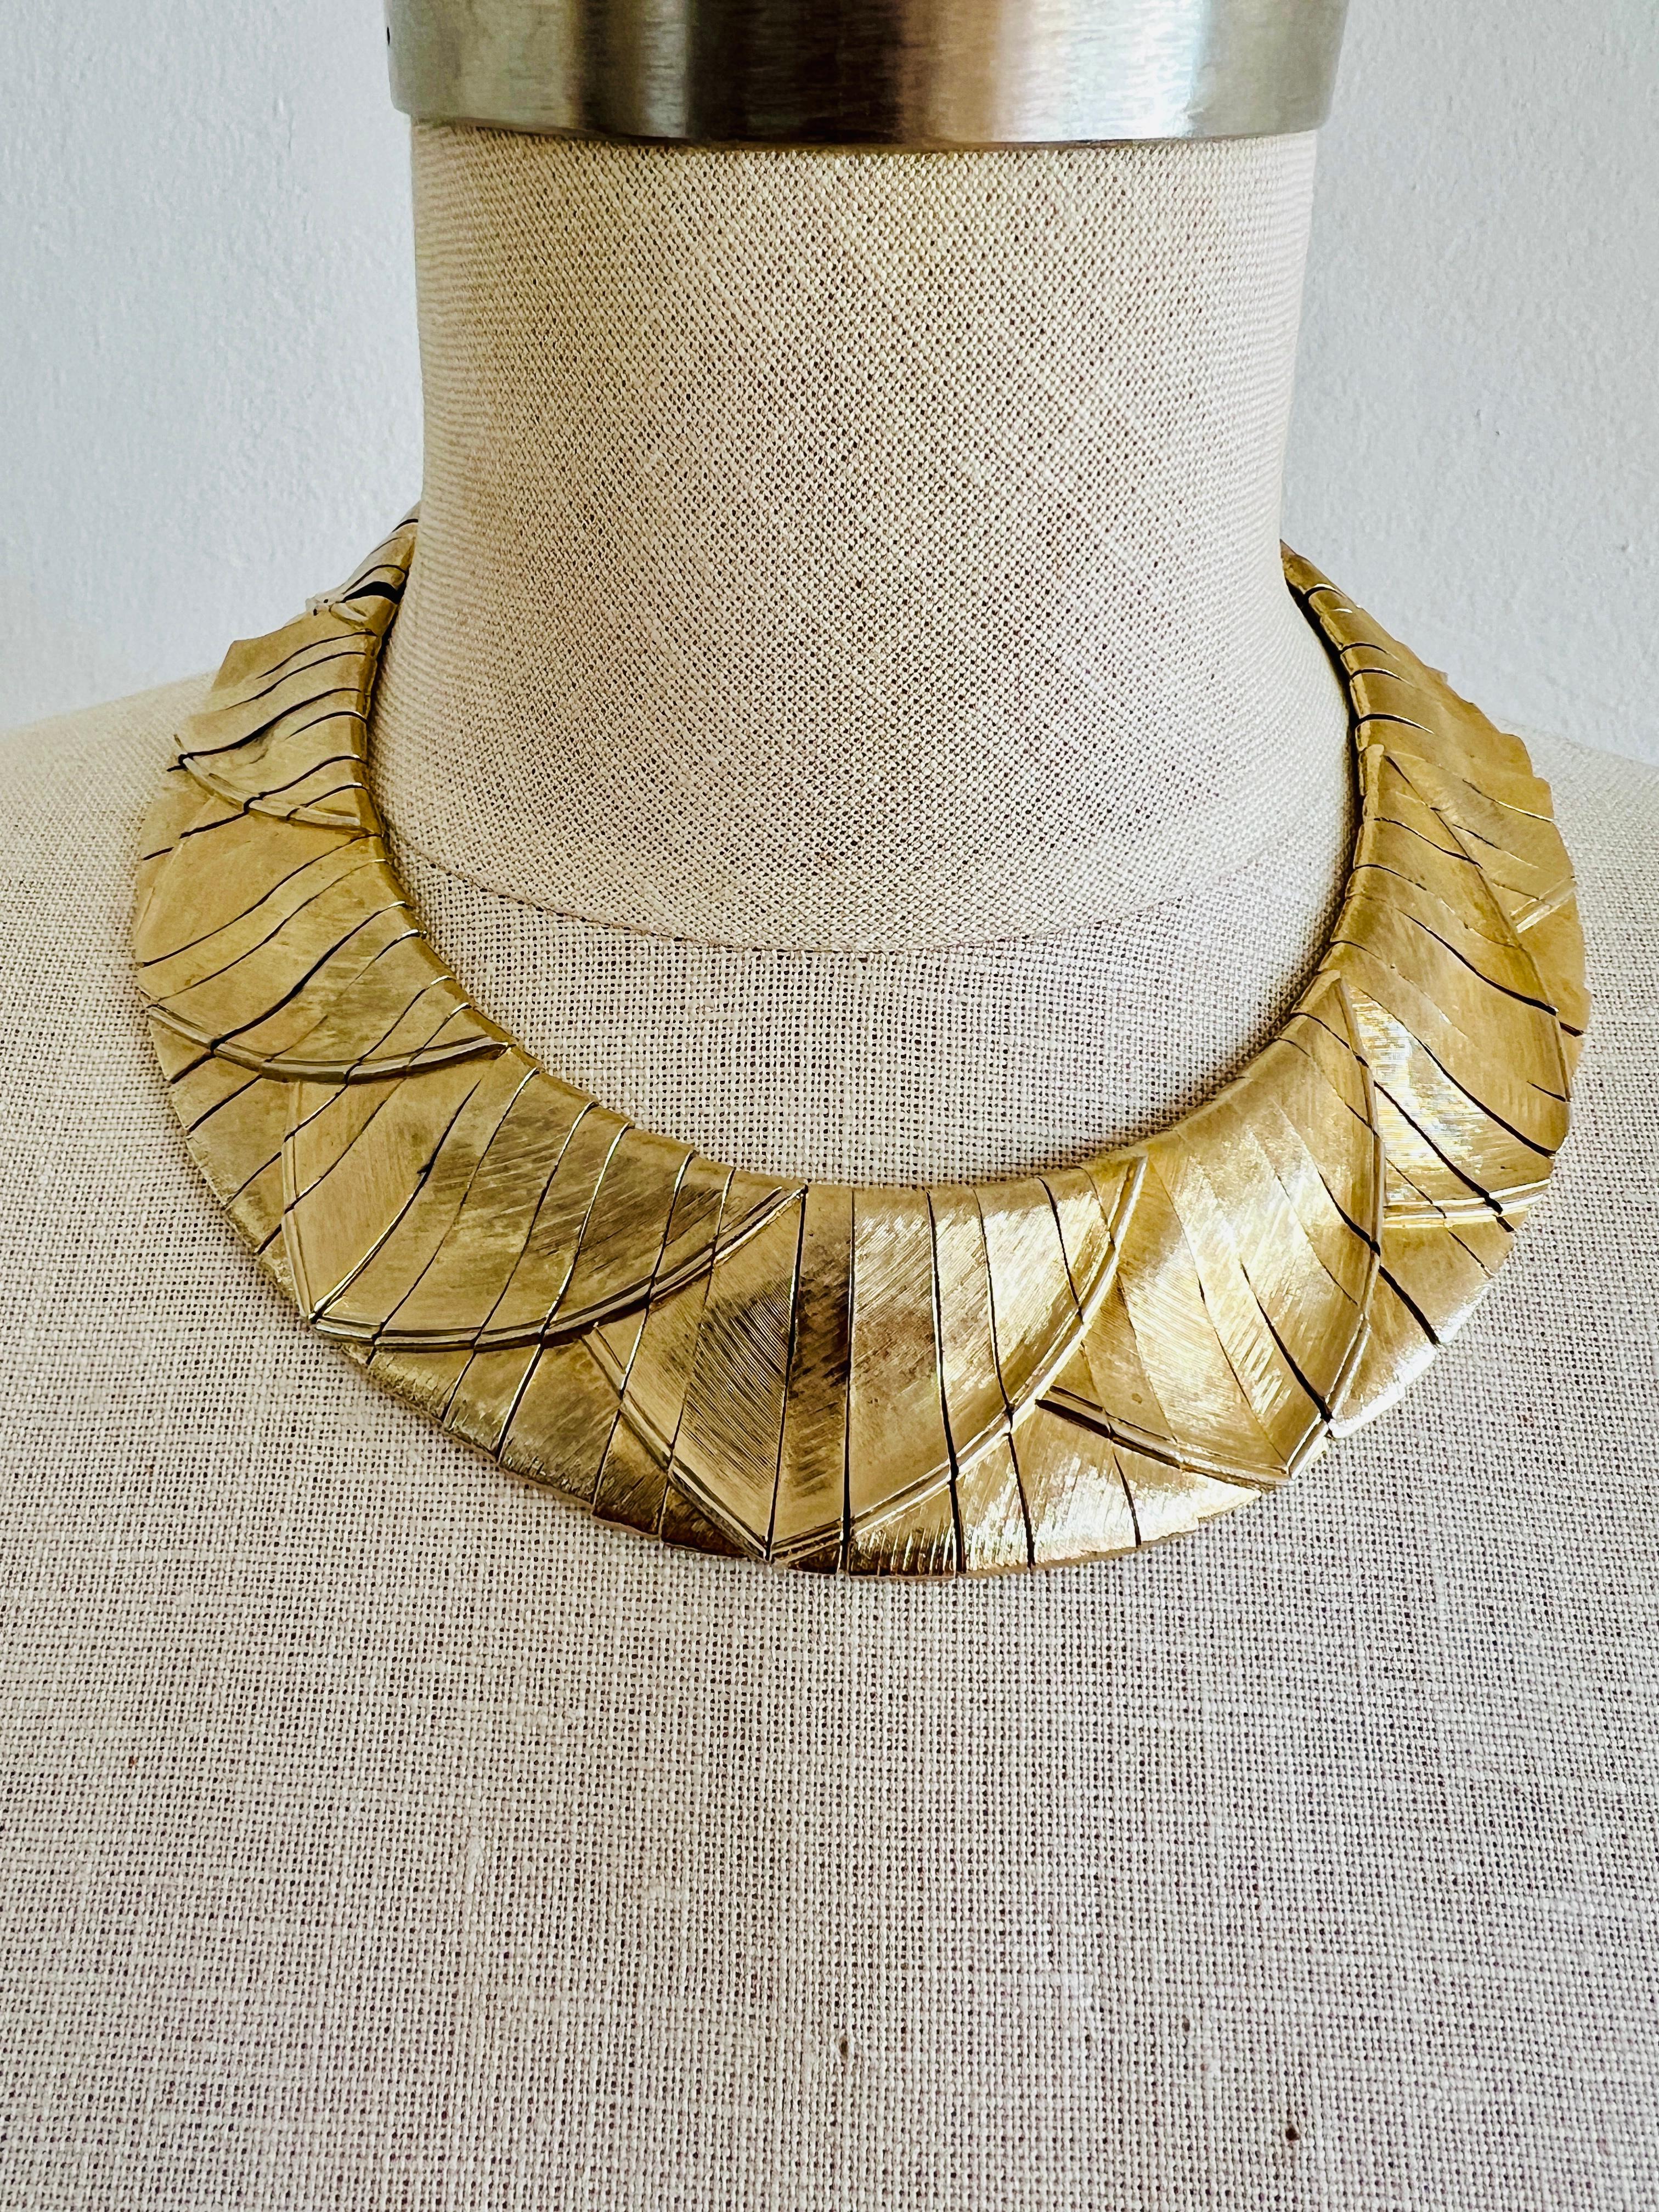 Les Bernard Egyptian Revival Pale Gold Brushed Choker Collar Necklace Cleopatra In Good Condition For Sale In Sausalito, CA